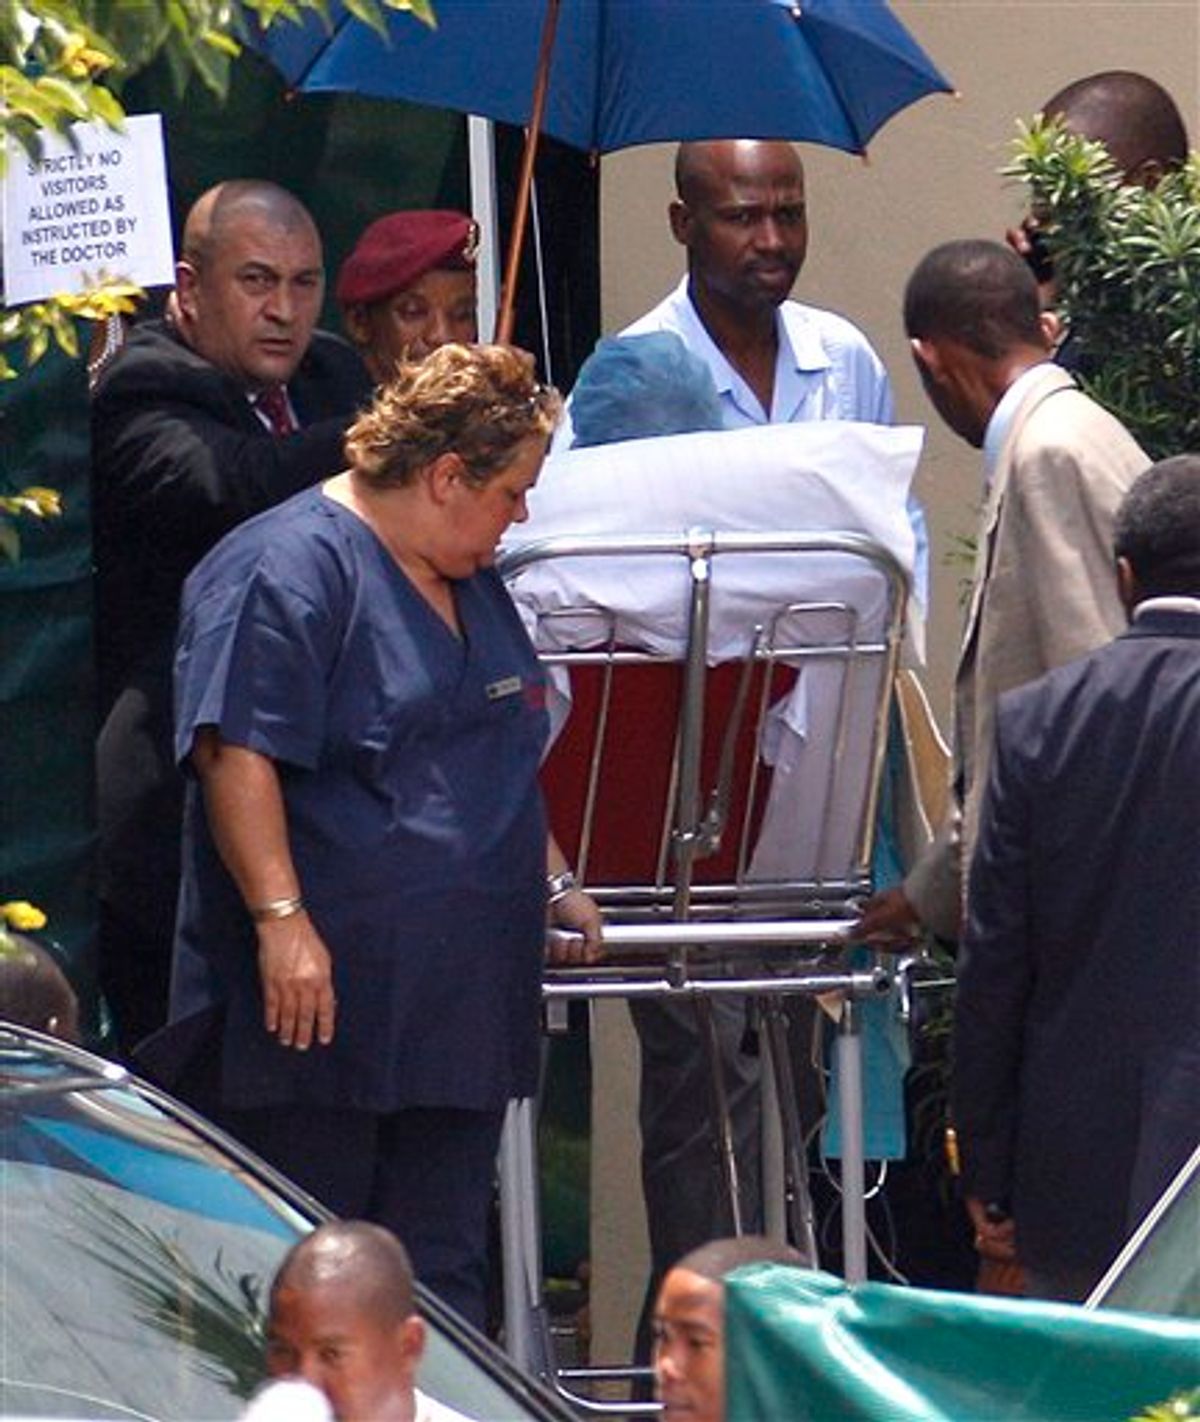 Former South African  President Nelson Mandela is wheeled out on a stretcher, as he leaves the Milpark Hospital in Johannesburg, South Africa, Friday, Jan. 28, 2011. Mandela was discharged to begin home-based care, after spending two-and-a-half days in hospital for treatment for a respiratory infection. (AP Photo/Themba Hadebe)      (AP)